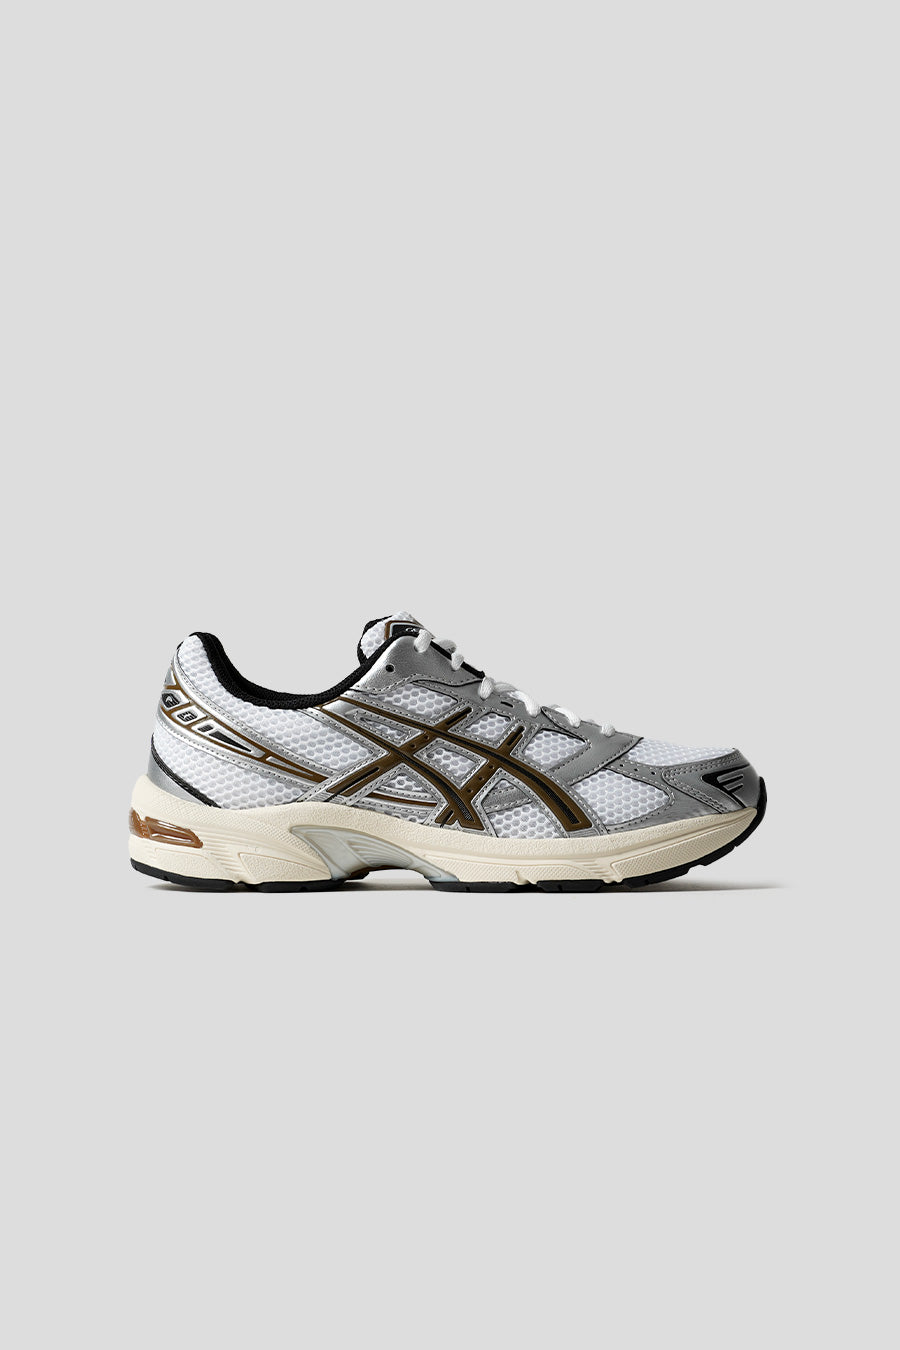 Asics WHITE AND CLAY CANYON GEL-1130 LE LABO